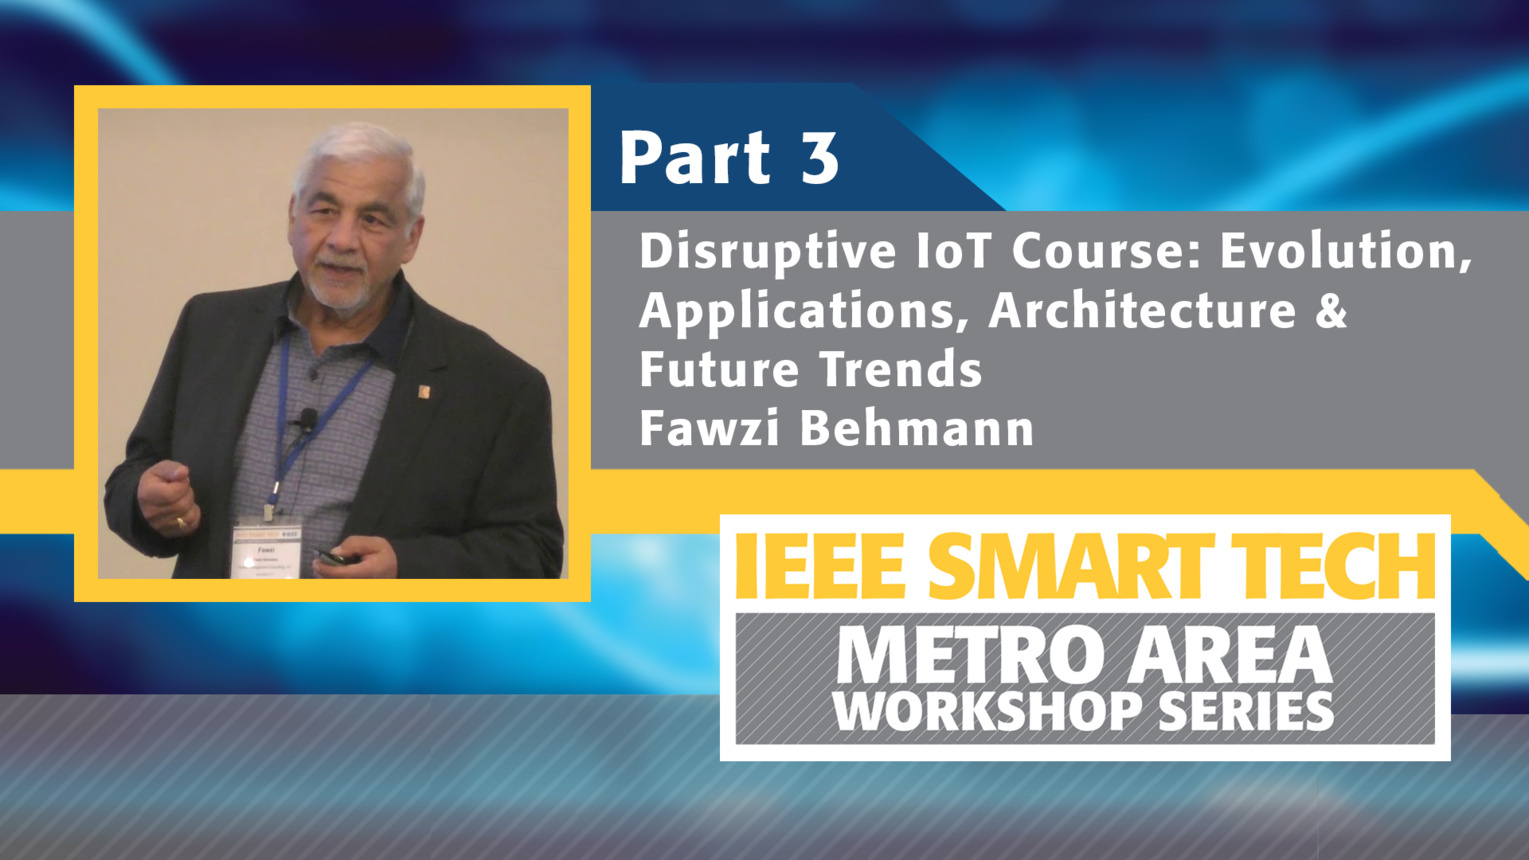 Disruptive Internet of Things course, Part 3 - IEEE Smart Tech Workshop